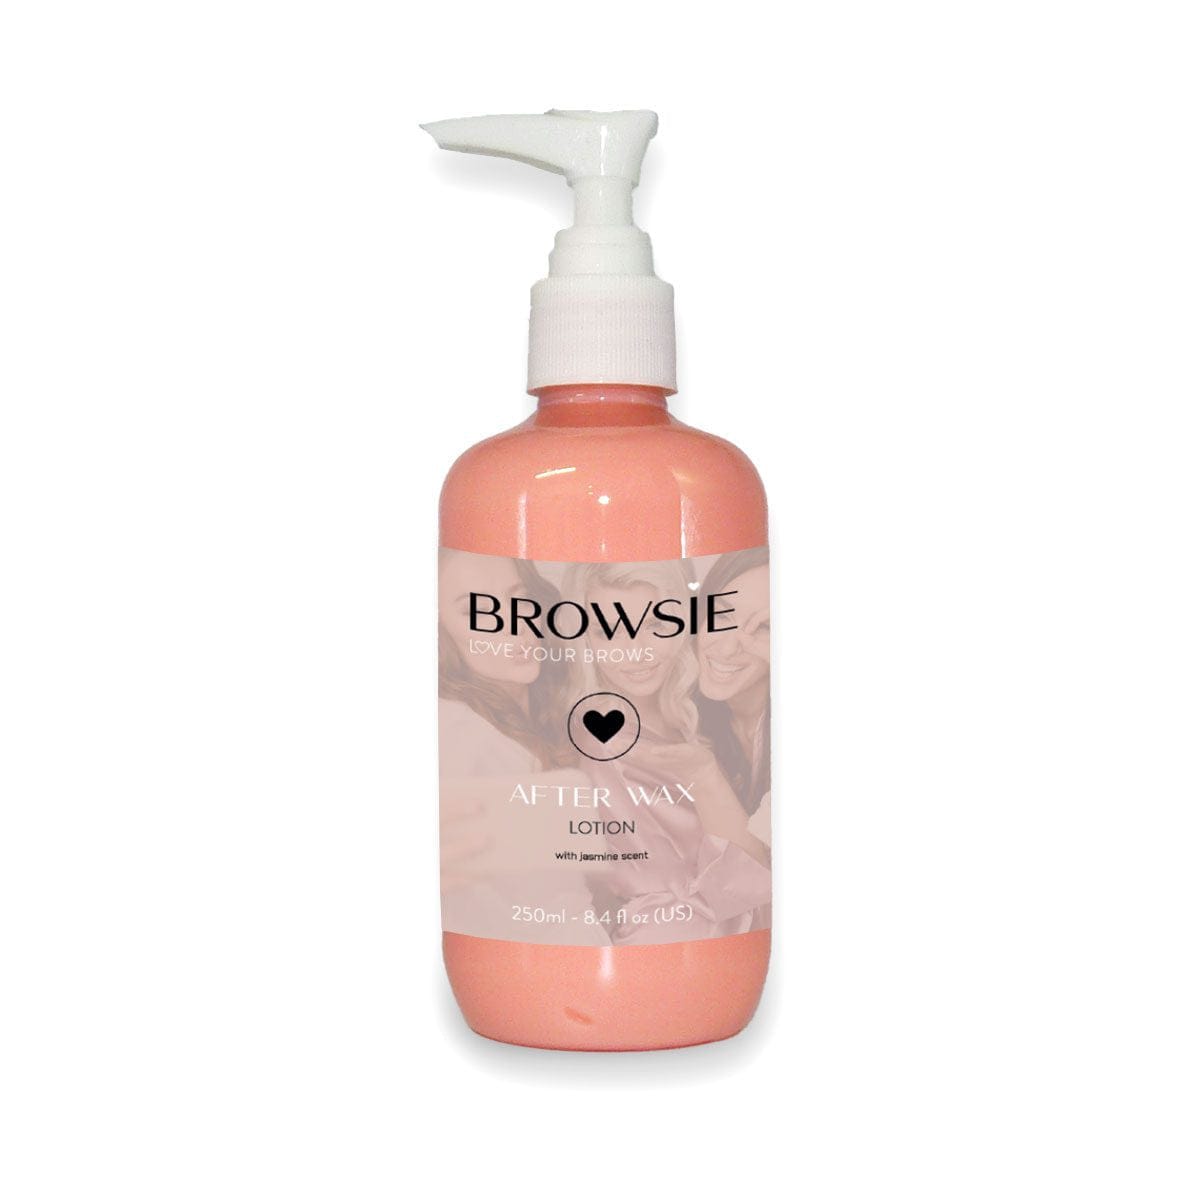 Browsie After Wax Lotion 250ml Lashes & Brows - Jax Wax - Luxe Pacifique